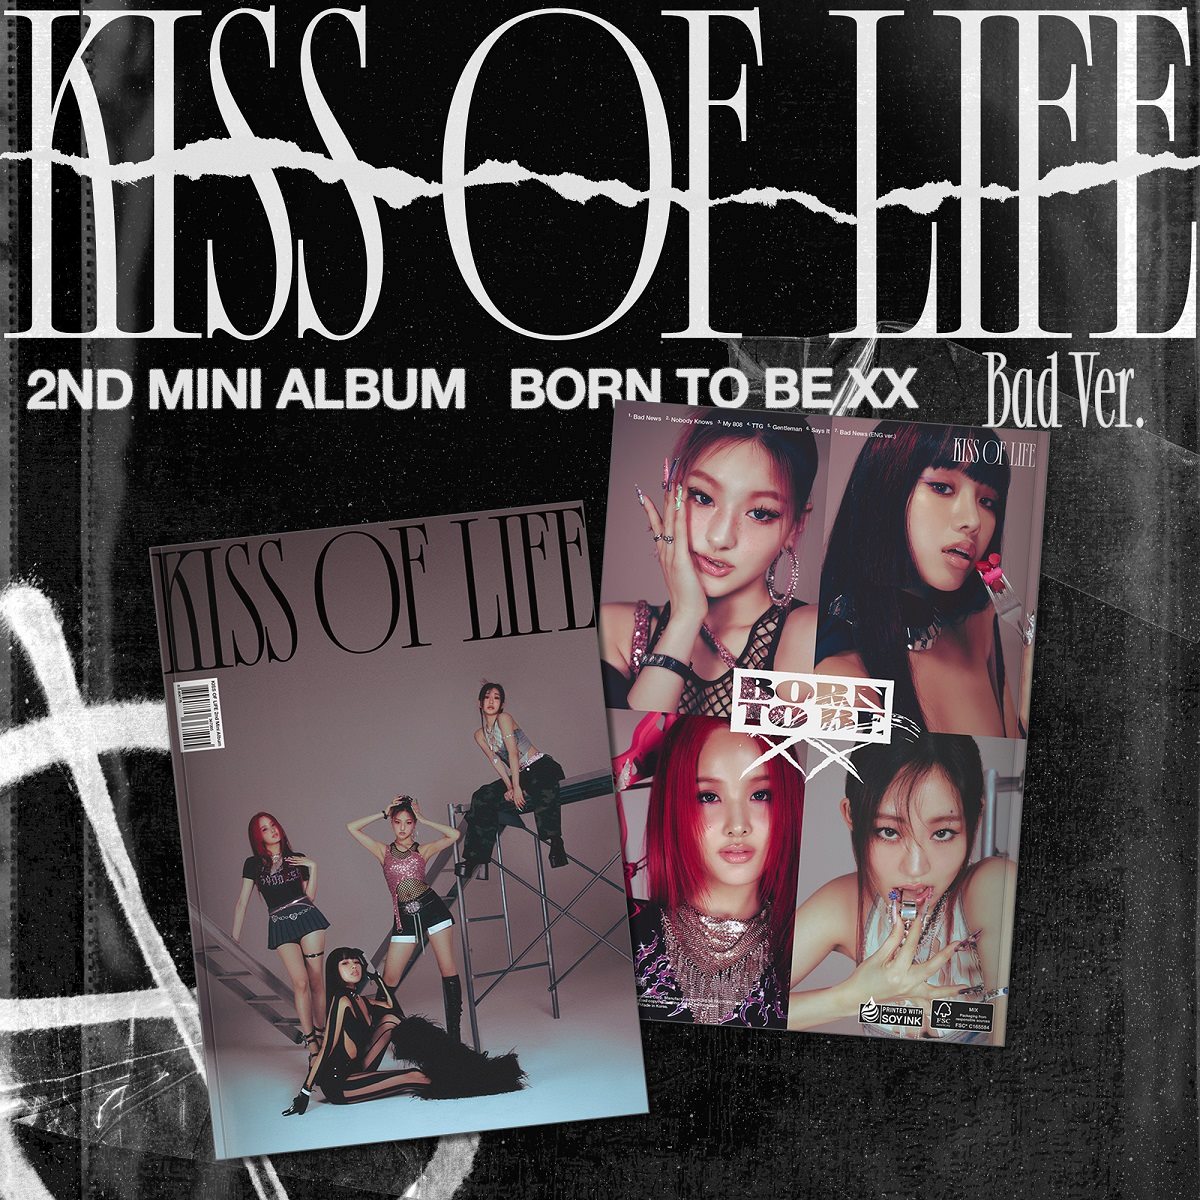 KISS OF LIFE - 미니 2집 [Born to be XX] (Bad Ver.)